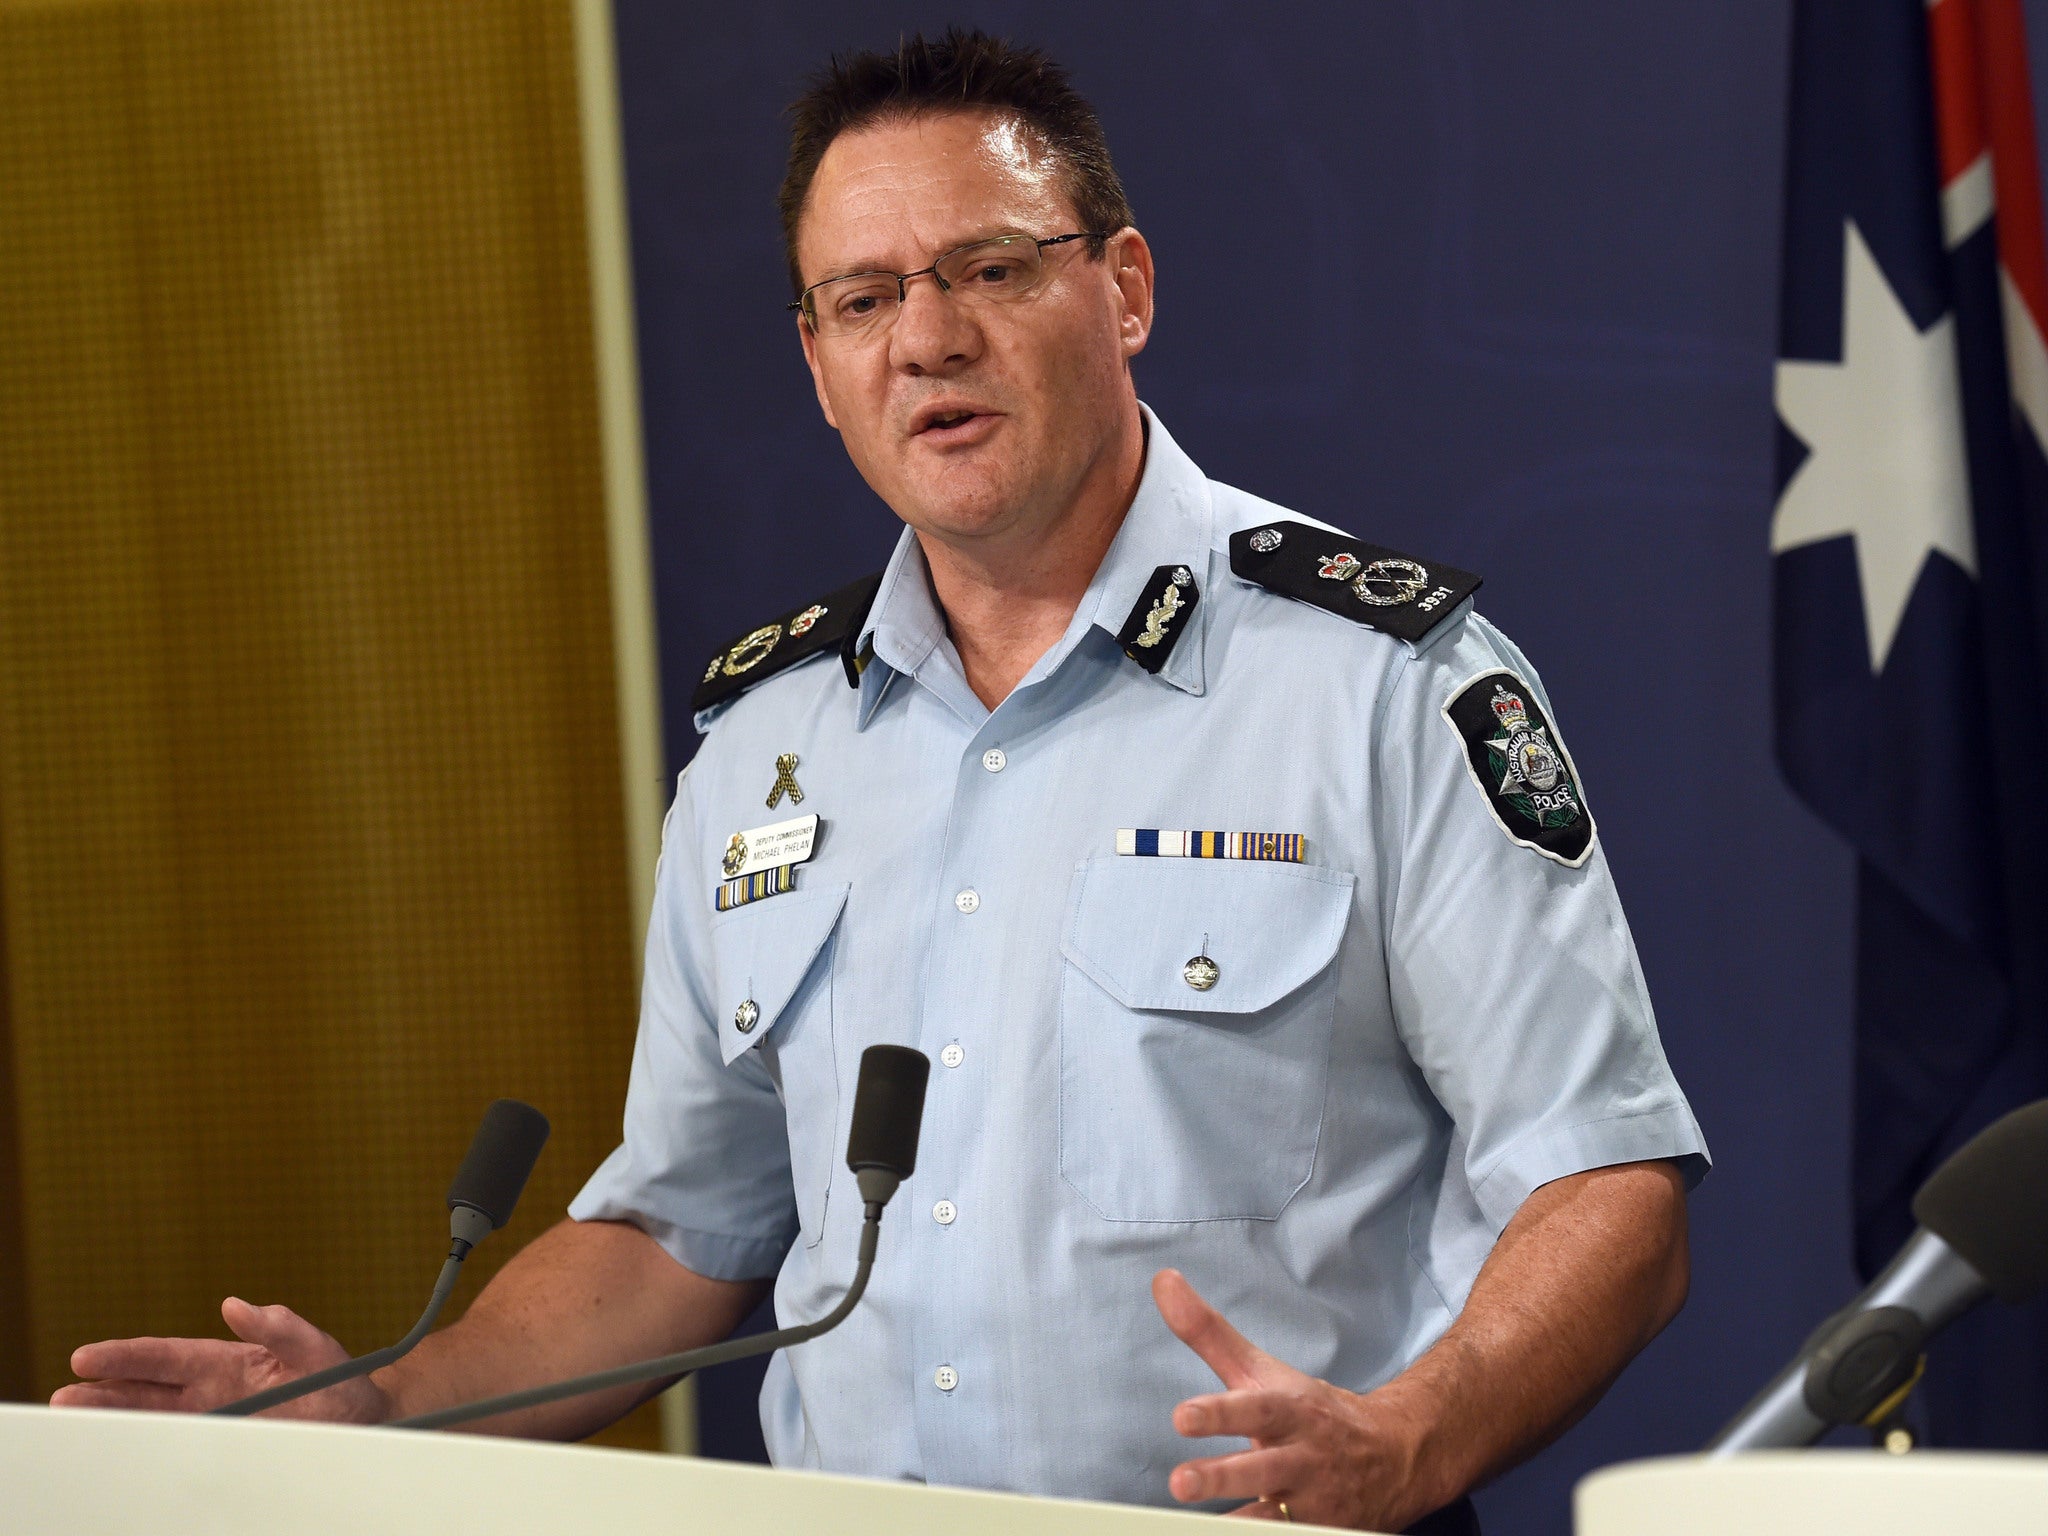 Australian Federal Police deputy commissioner Michael Phelan speaks to the media in Sydney in April, after two men were arrested for allegedly planning an Isis-inspired attack on an Anzac day parade.